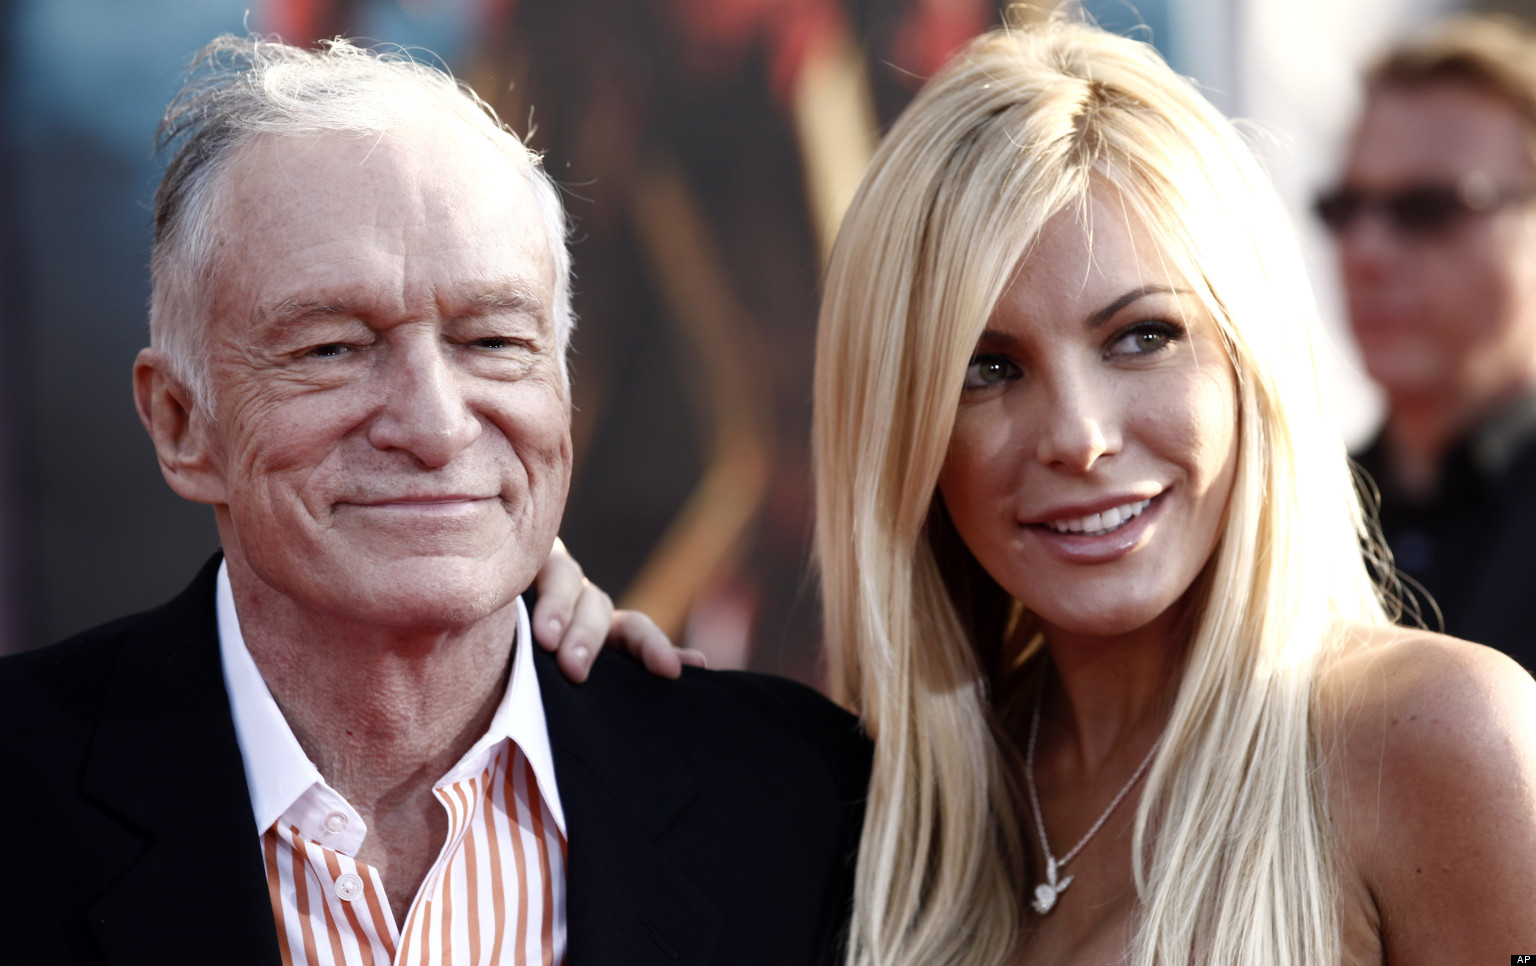 FILE - Hugh Hefner, left, and Crystal Harris arrives at the premiere of "Iron Man 2" at the El Capitan Theatre in Los Angeles in this April 26, 2010 file photo. Hefner says he's gotten engaged again. Hefner said in a Twitter message early Saturday Dec. 24, 2010 that he'd given a ring to girlfriend and Playmate Crystal Harris, saying she burst into tears. (AP Photo/Matt Sayles, File)